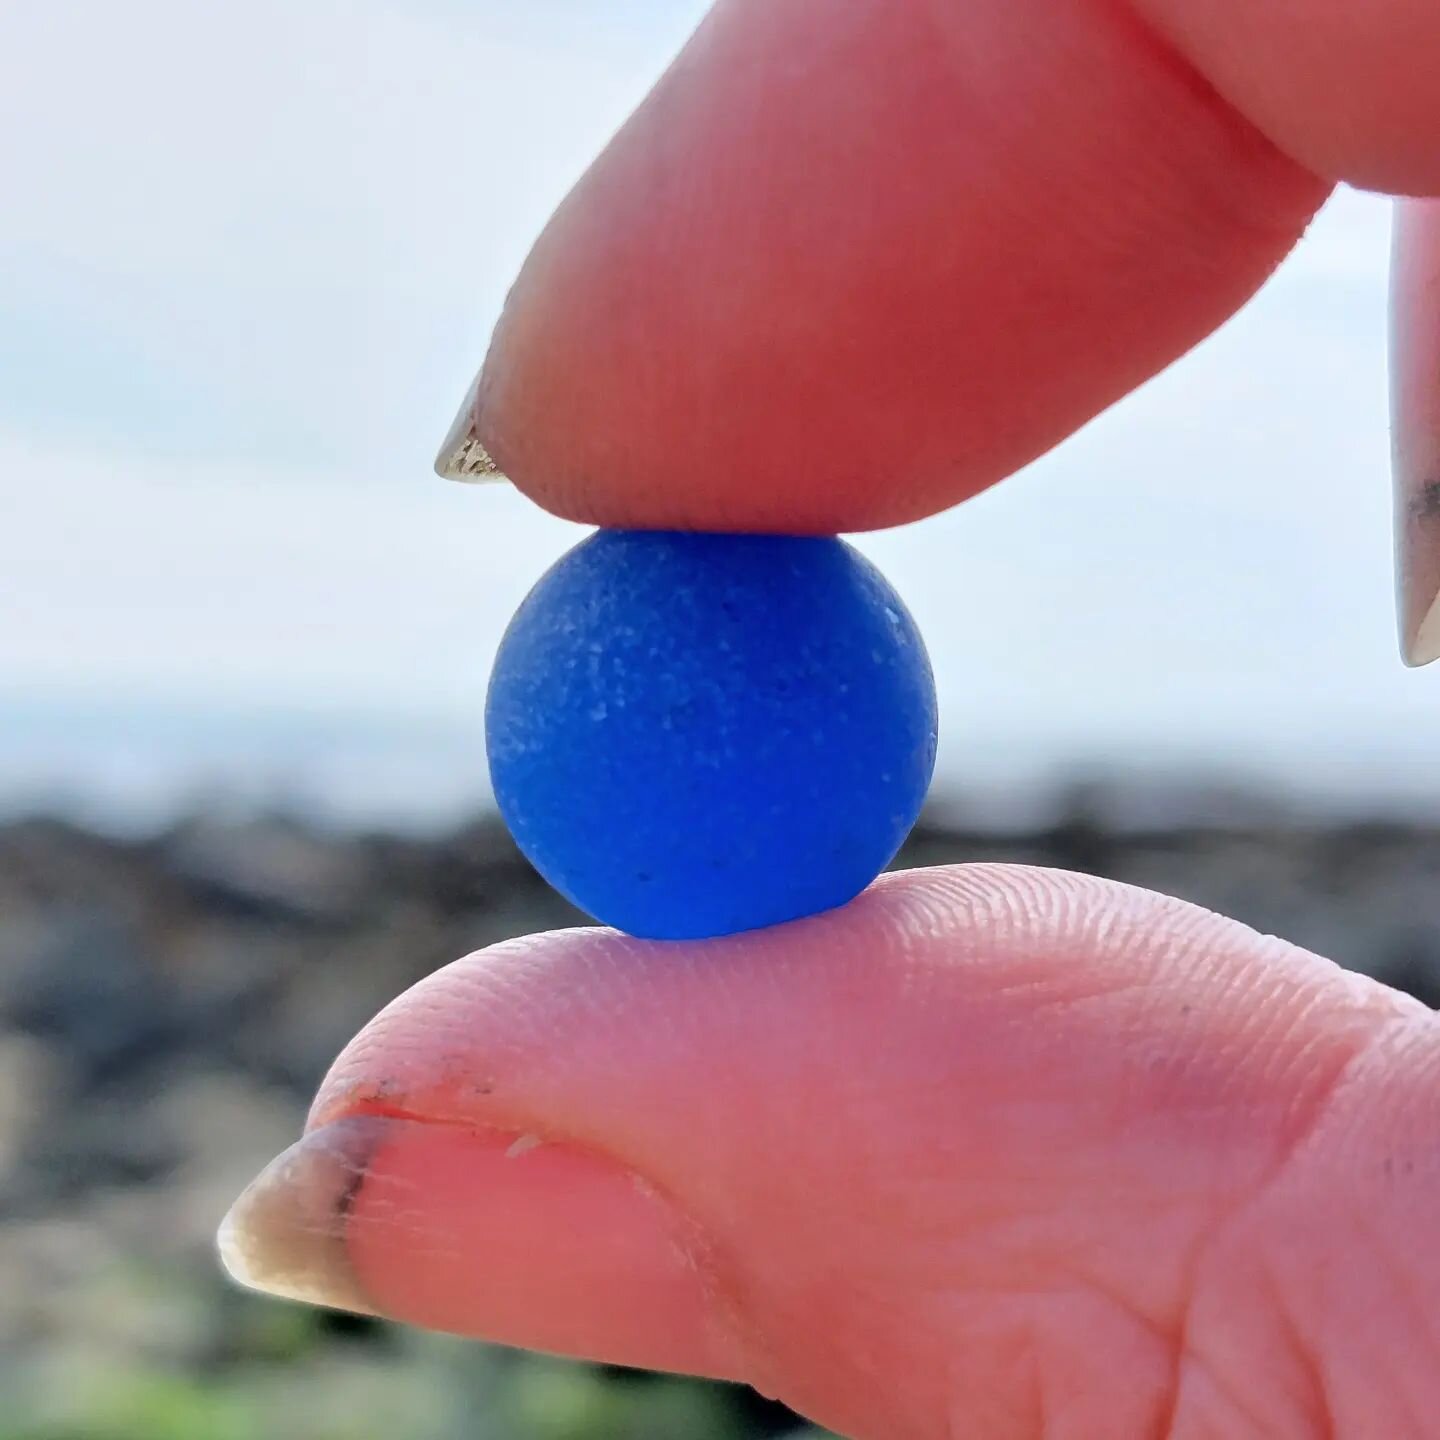 Cobalt blue codd bottle marble beach glass. I almost feel like I didn't deserve this find! Just wow! Found on an out of the way, hard to access beach on the Isle of Wight. #seaglass #beachcombing #mudlark #mudlarking #mudlarkingfinds #coddbottle #cod